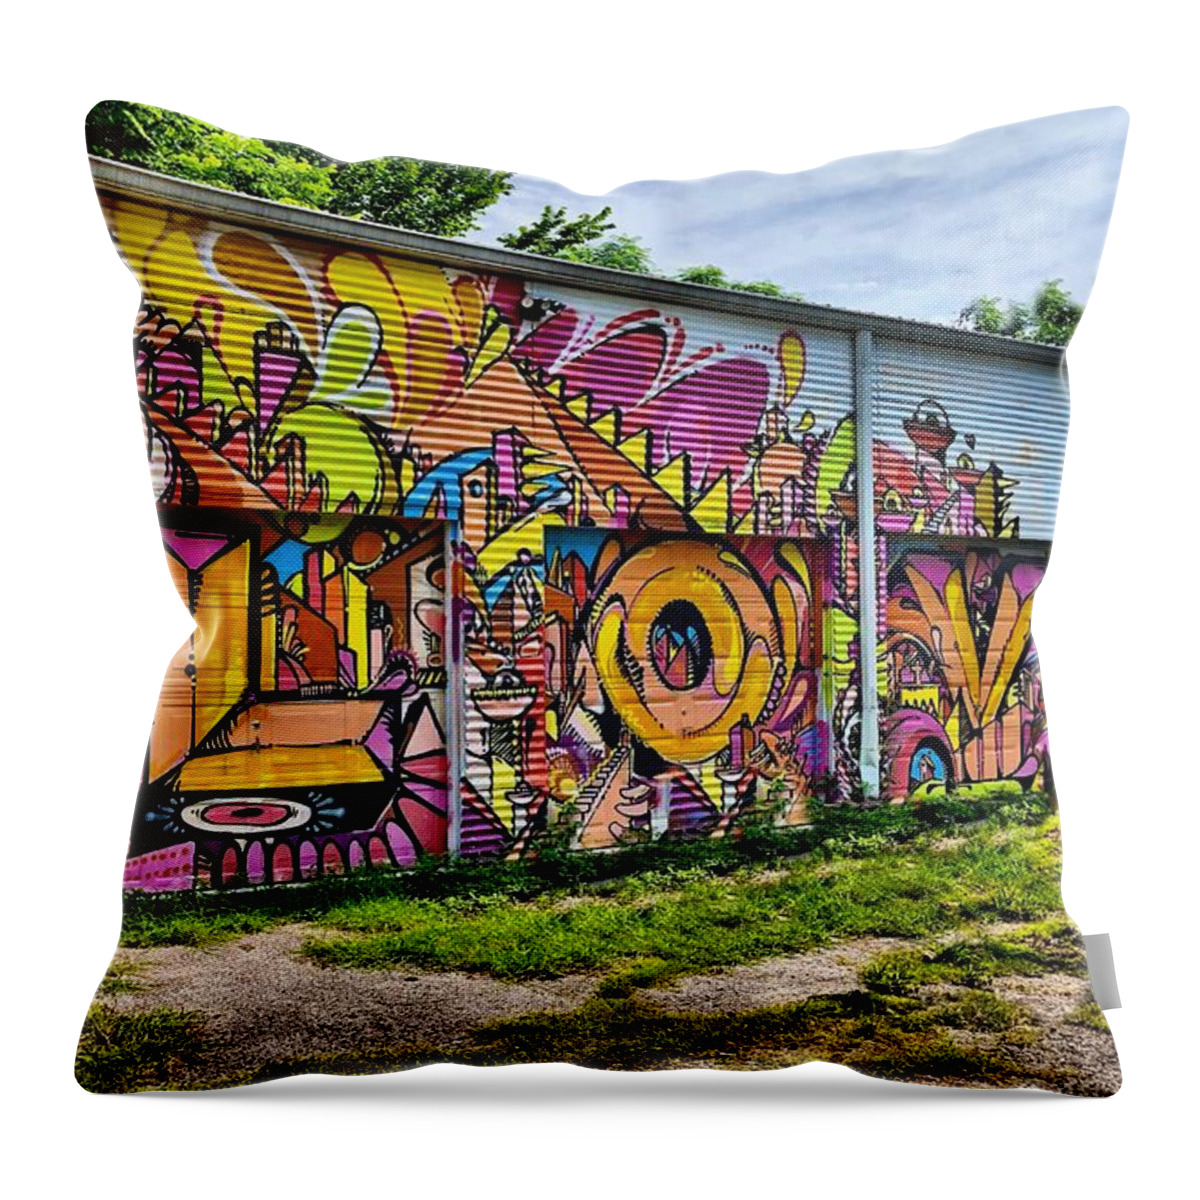 Graffiti Throw Pillow featuring the photograph Love Is All You Need by Linda Unger